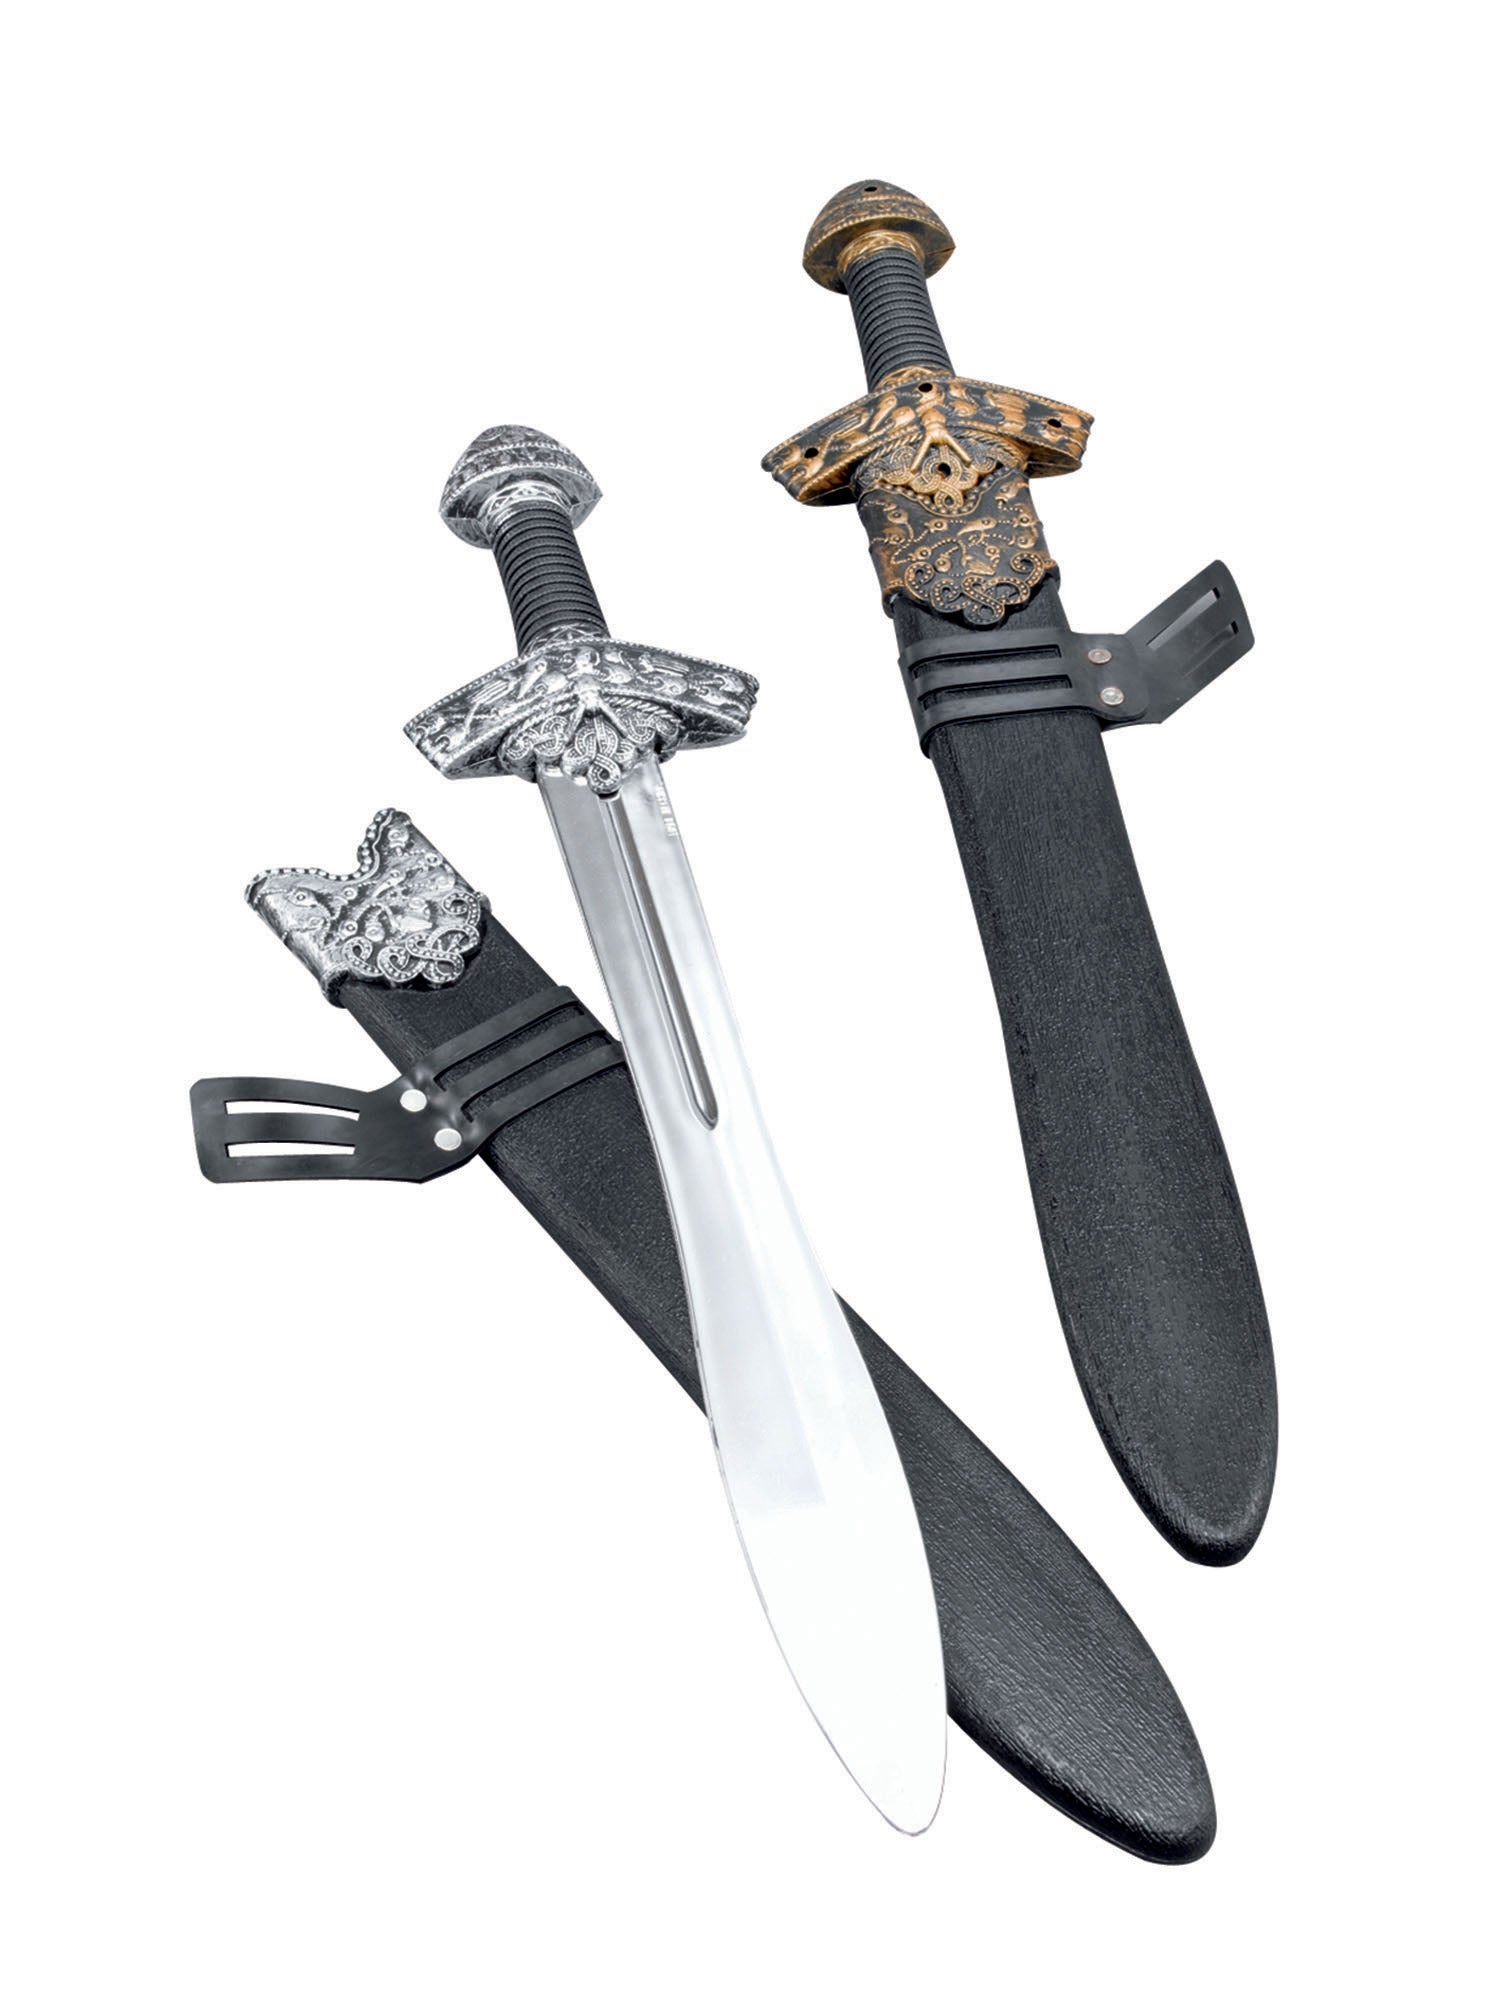 Sword, Multi, Generic, Accessories, One Size, Front